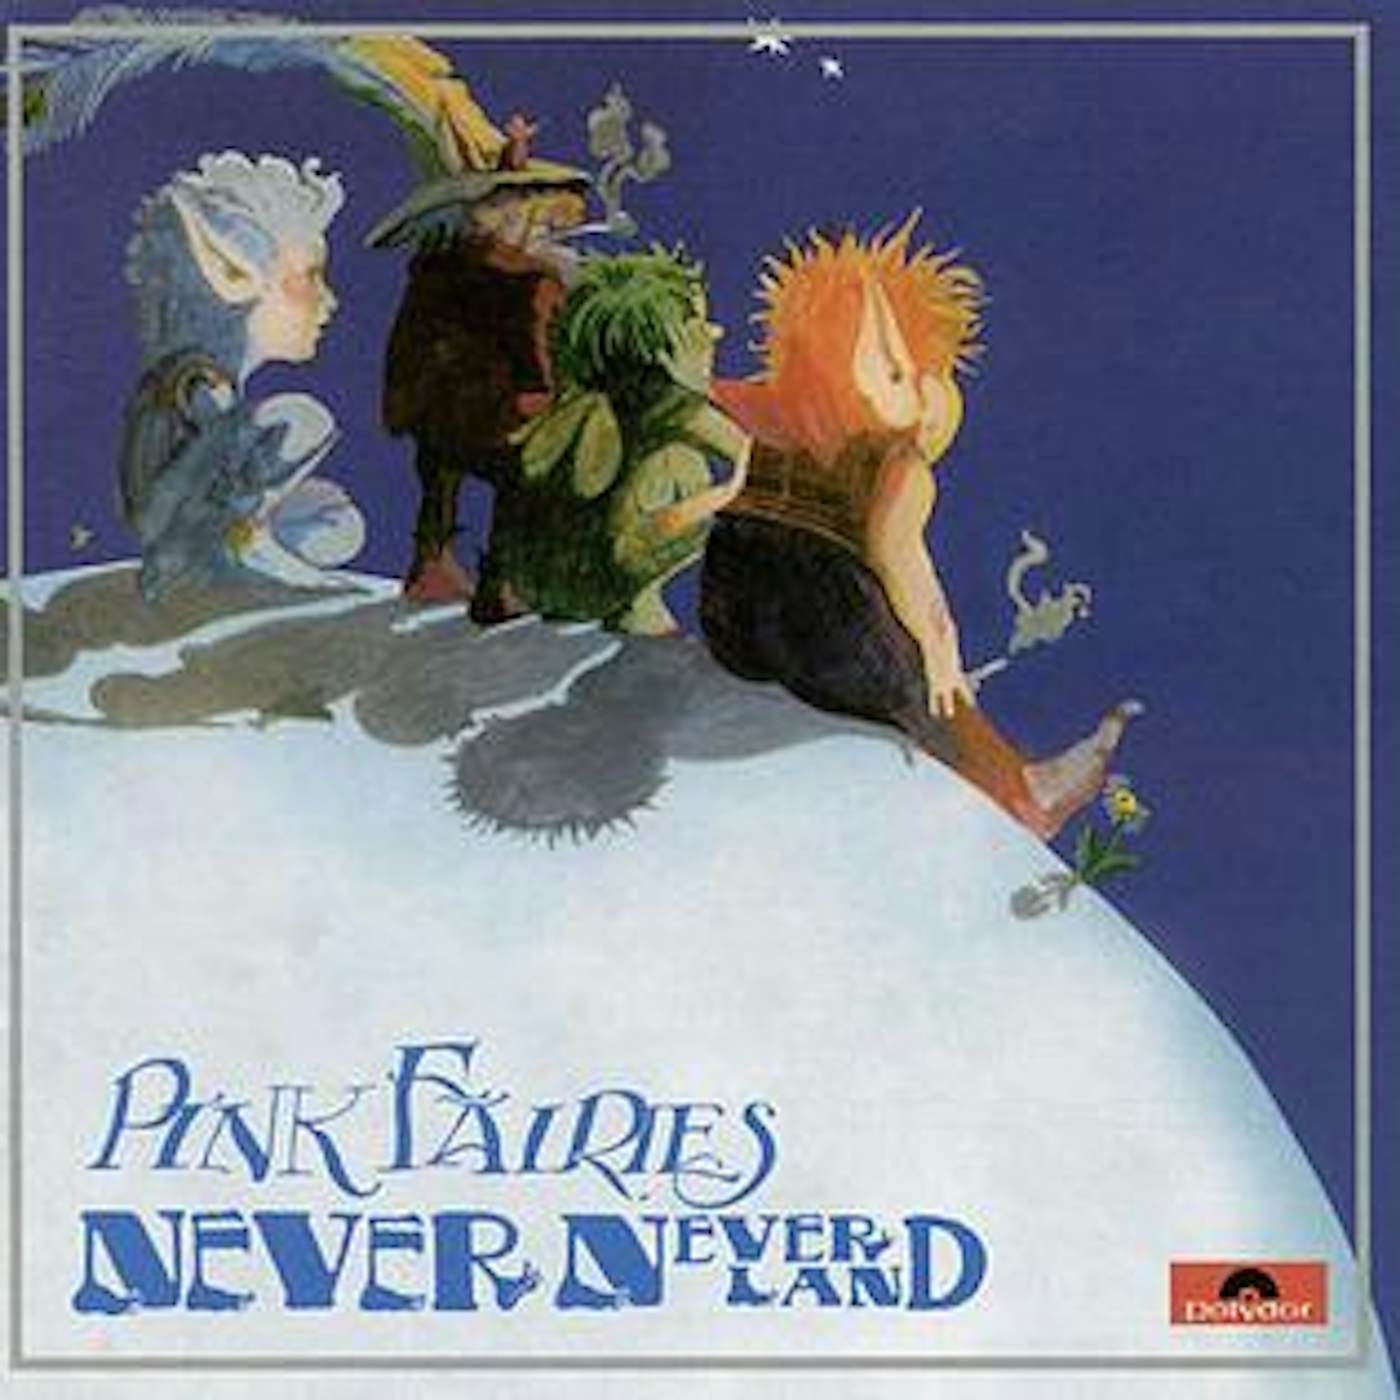 The Pink Fairies NEVER NEVER LAND Vinyl Record